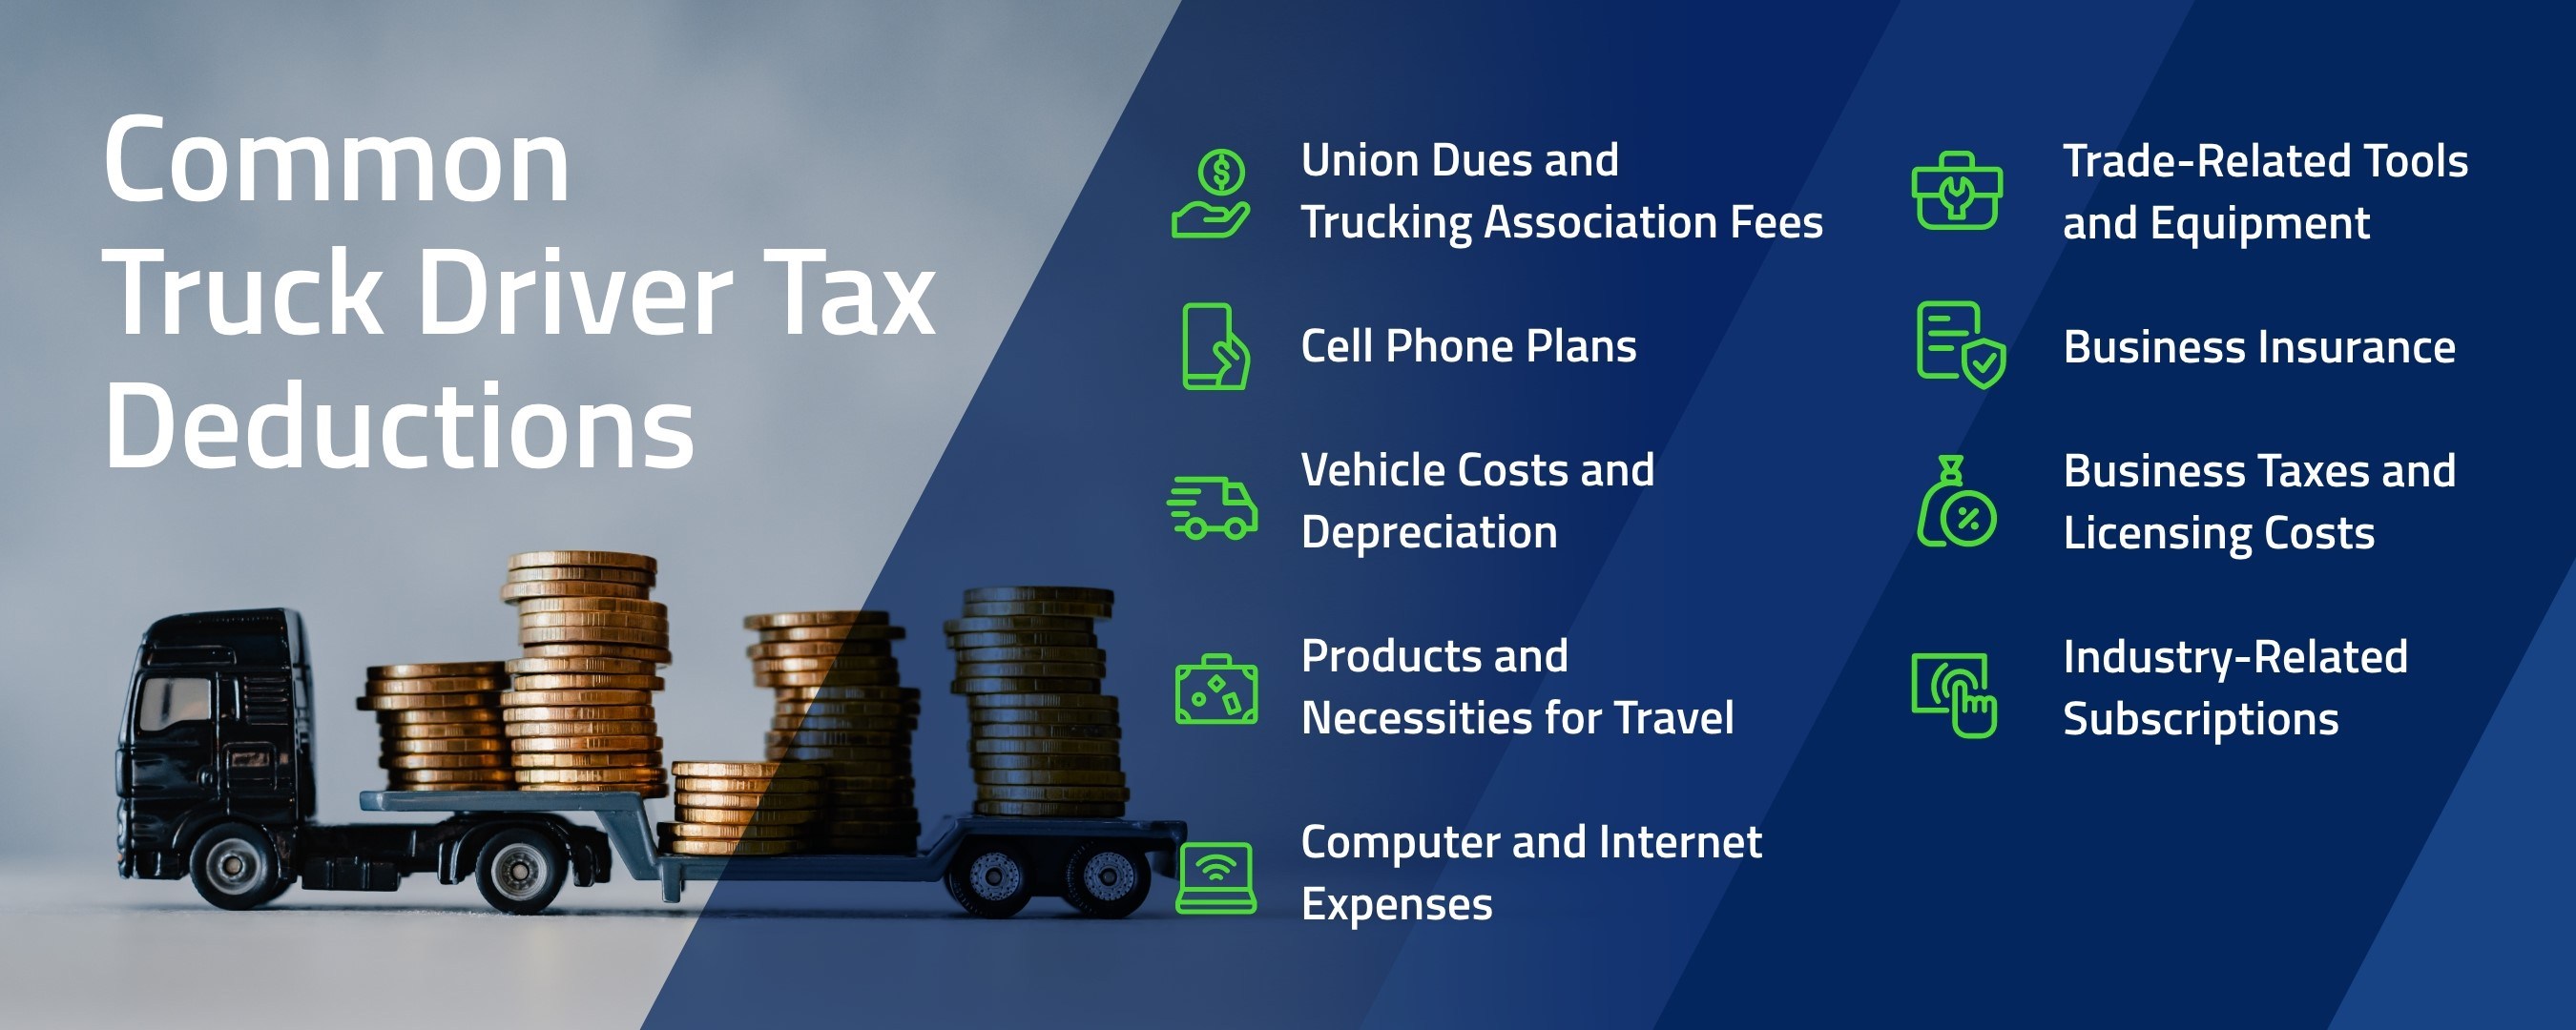 common truck driver tax deductions graphic